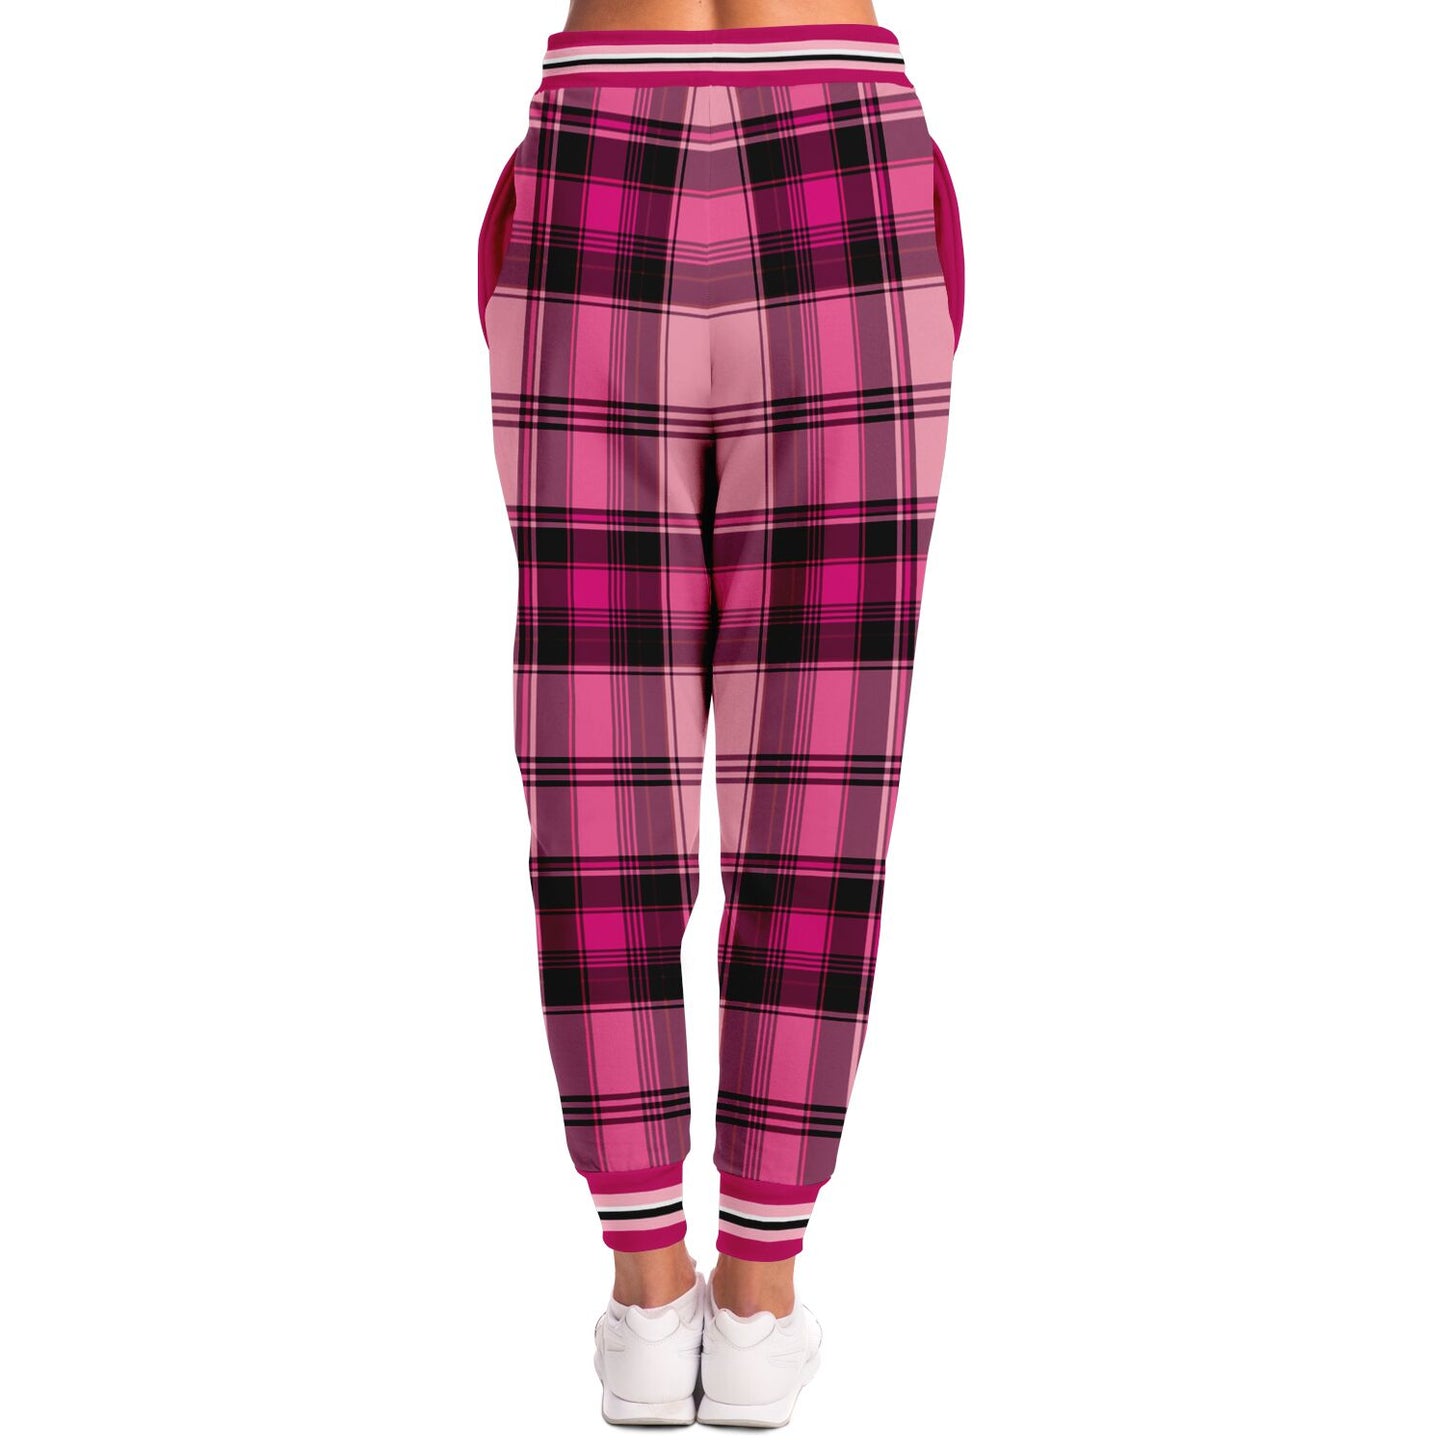 CA 1850 Pink Plaidster Eco-Poly Unisex Joggers